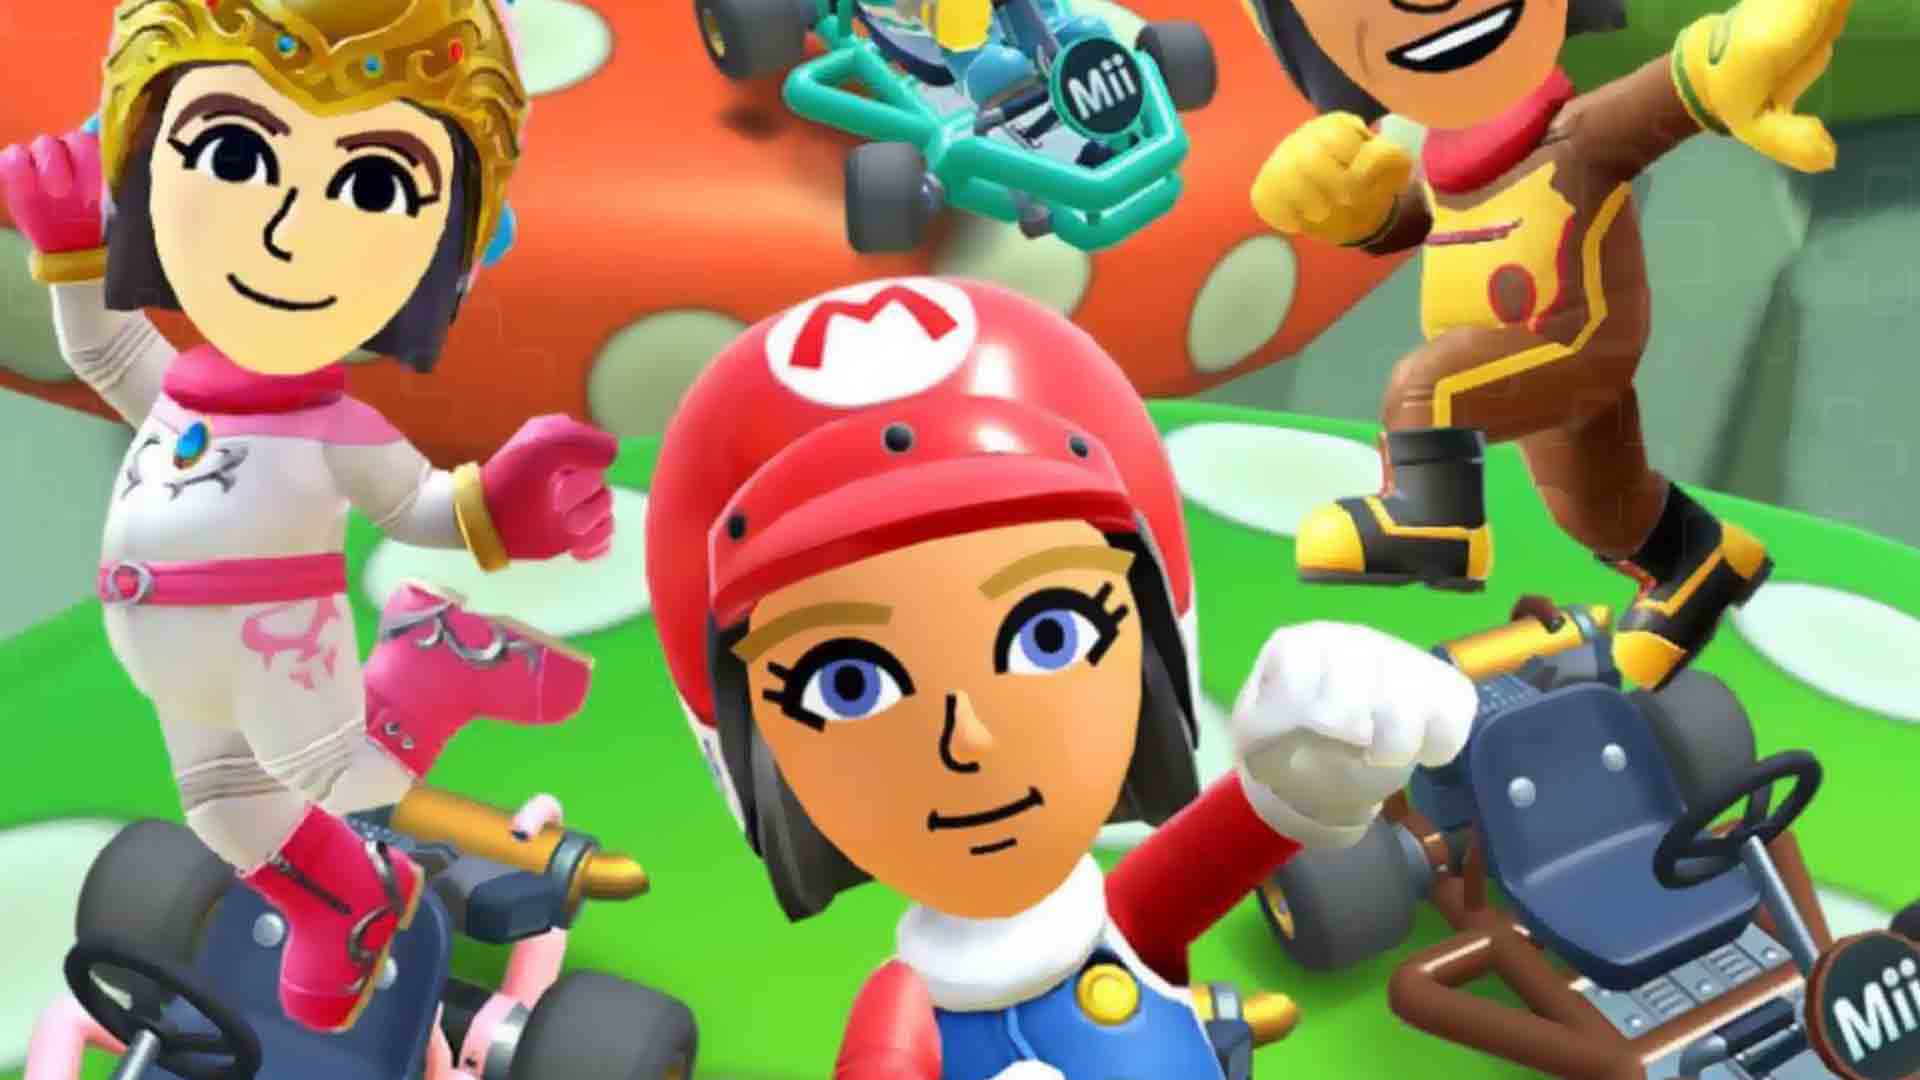 New updates race into Mario Kart Tour, including Miis and more